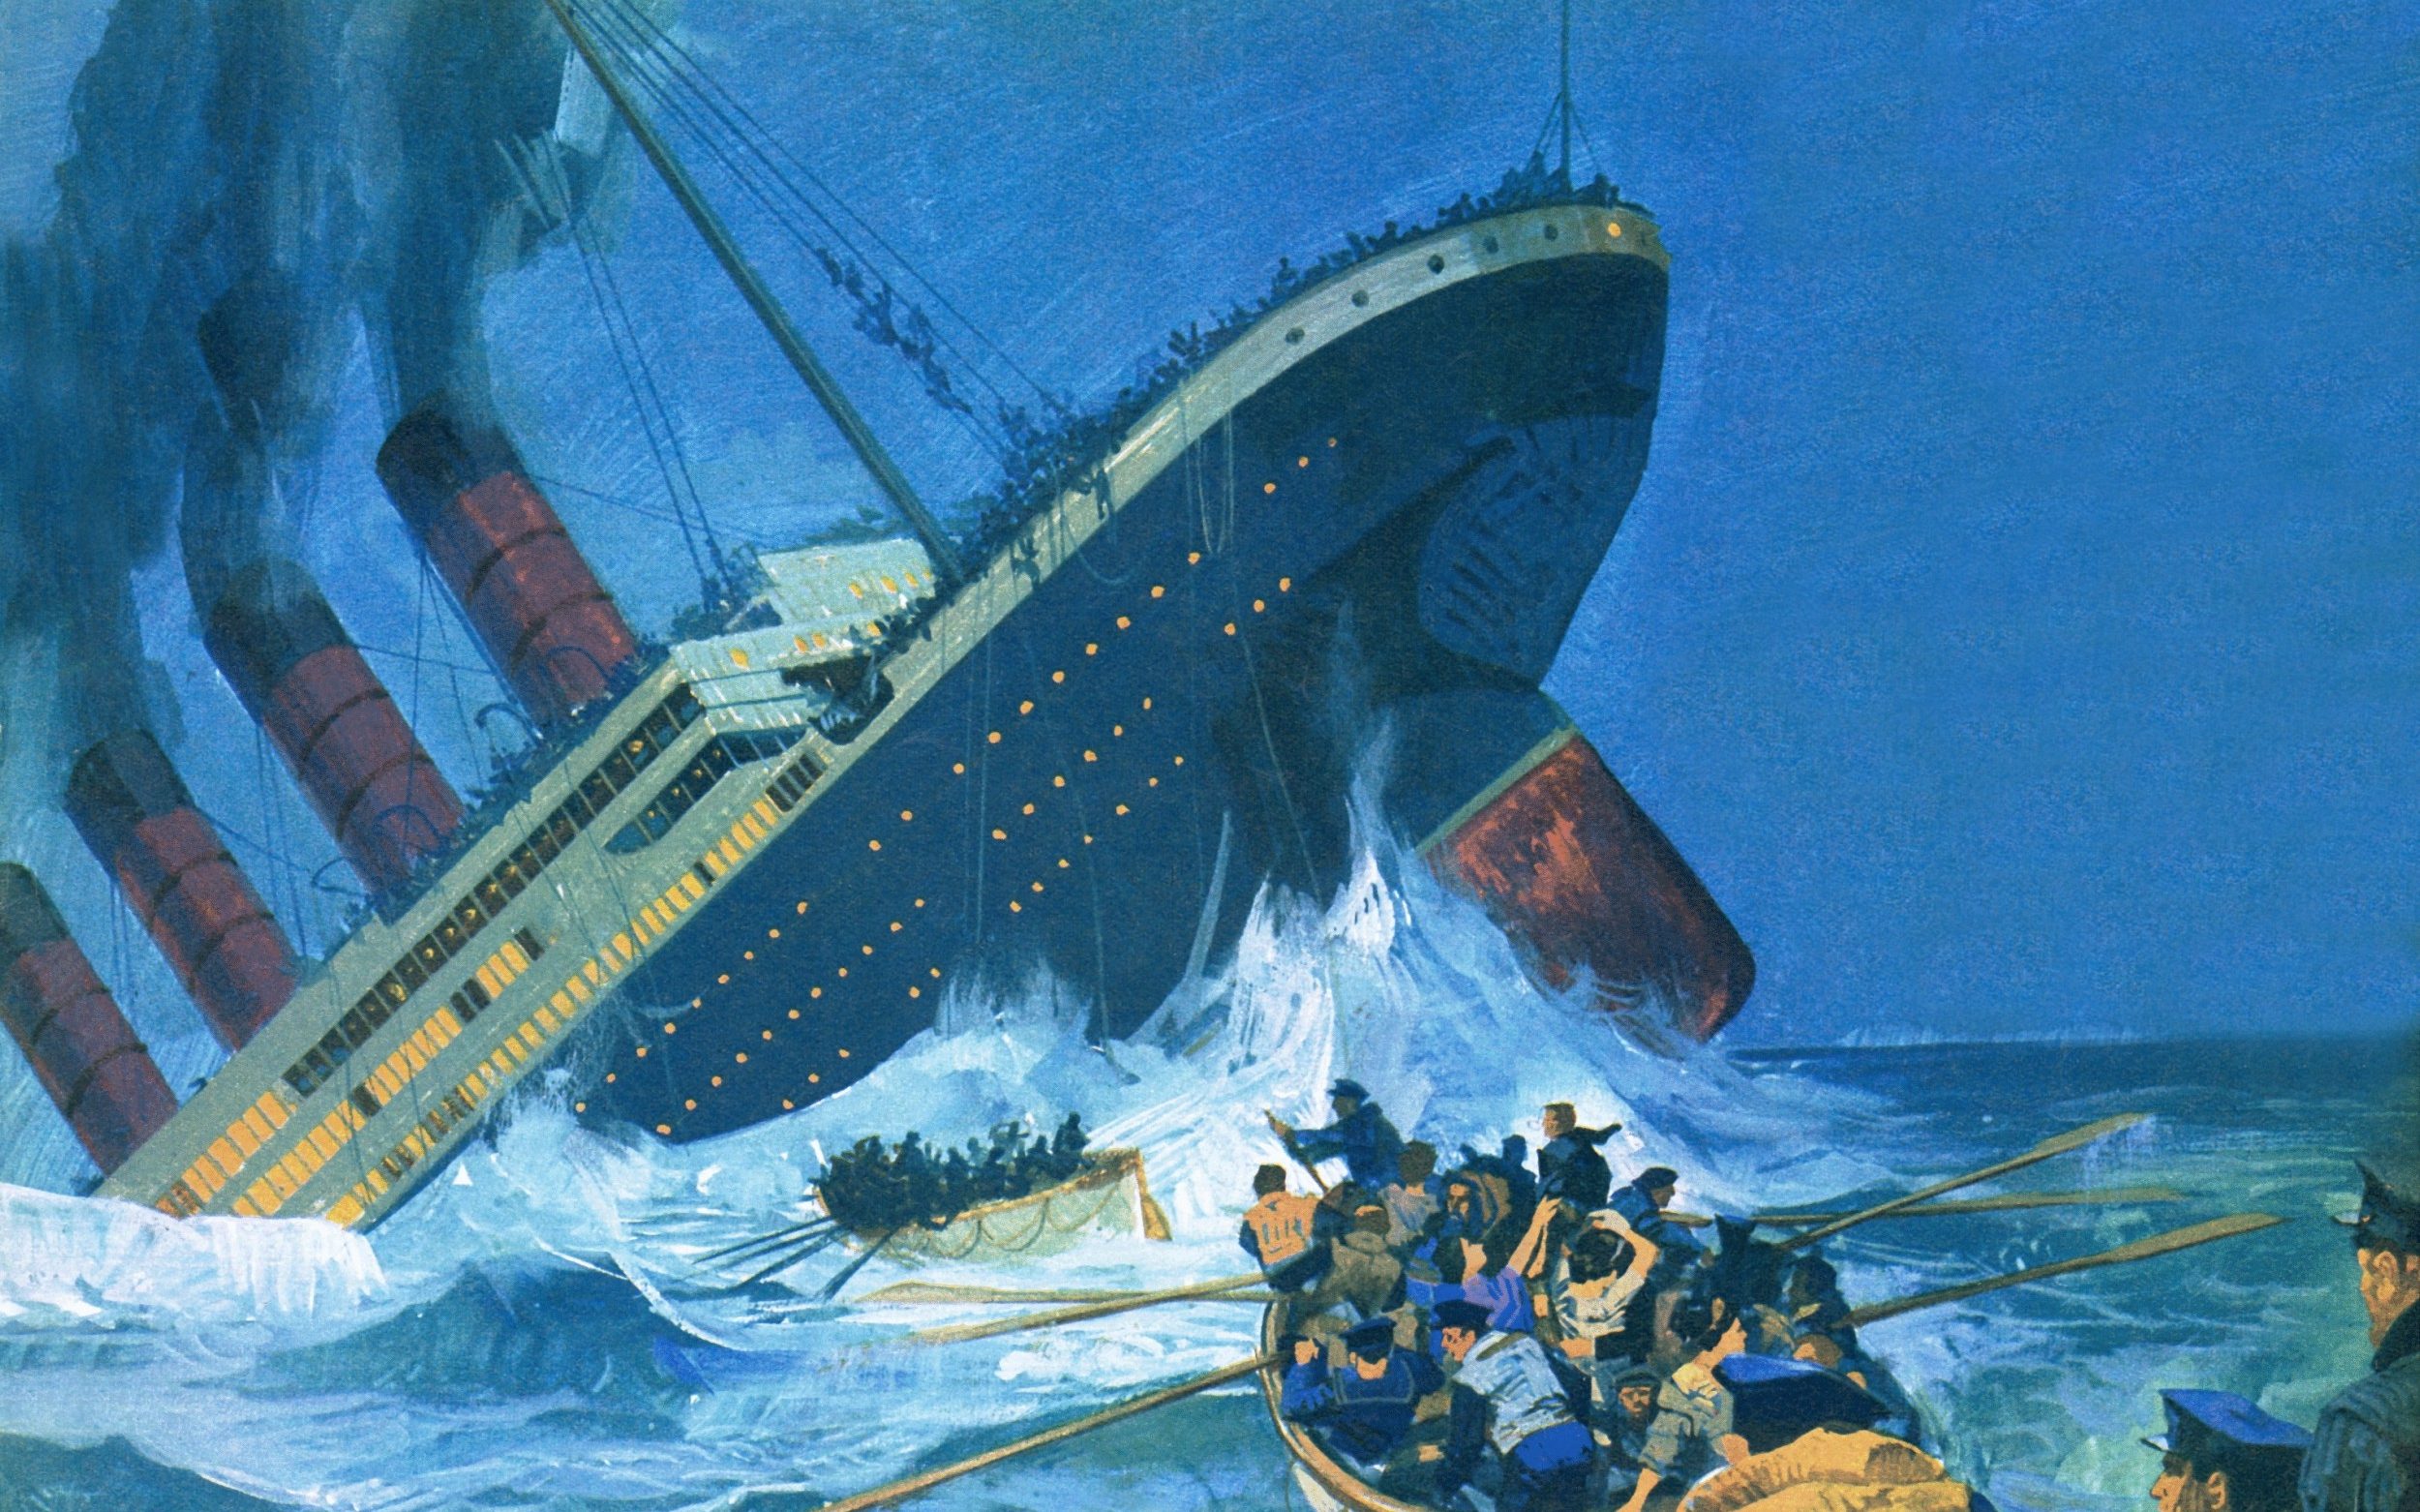 How Many People Survived the Sinking of the Titanic?